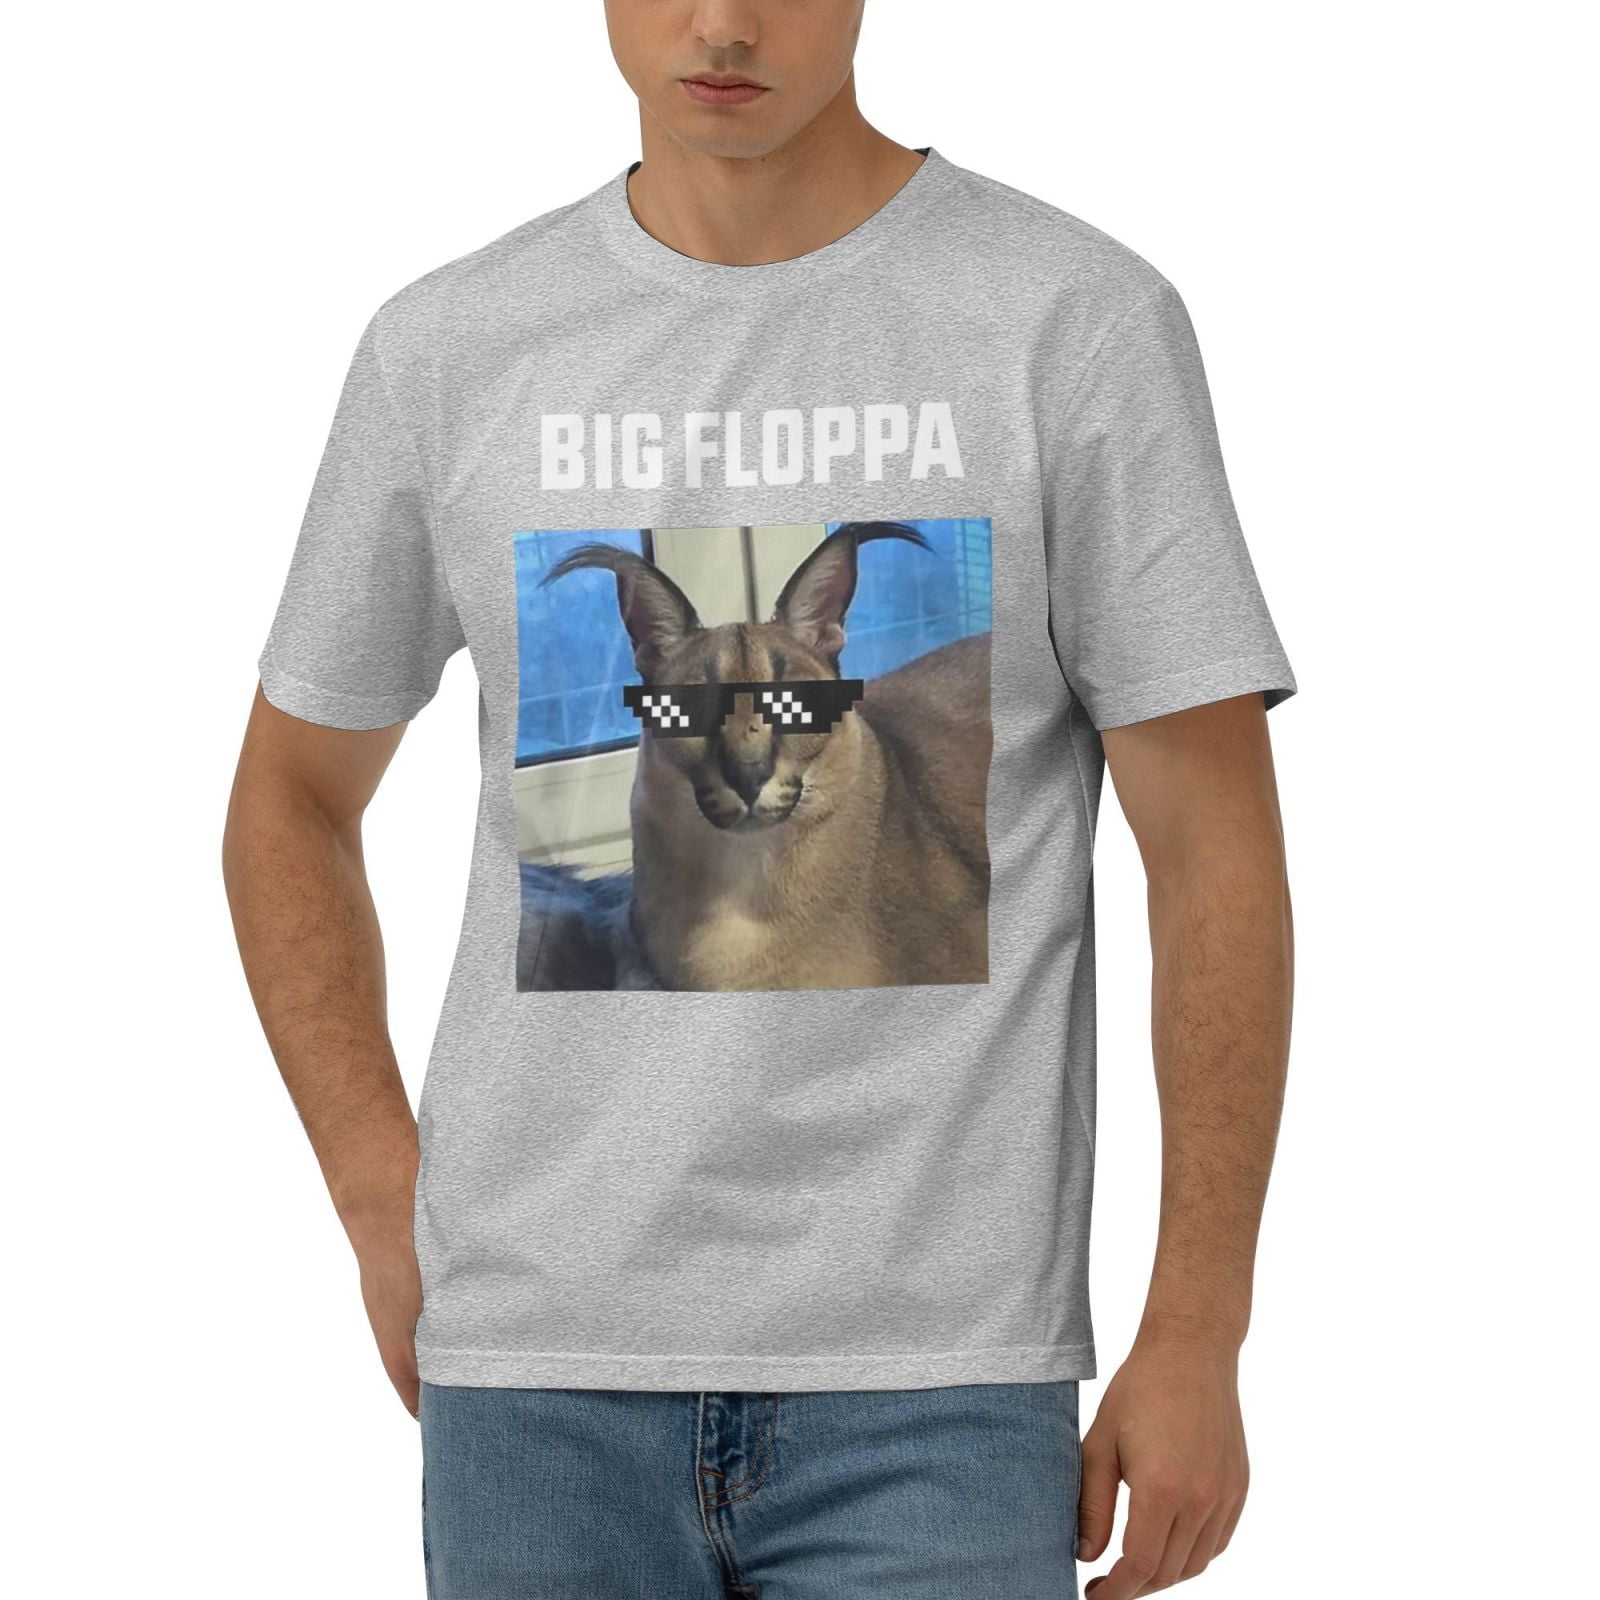 Big Floppa Cat flop off flop on Funny Classic T-Shirt | Sticker